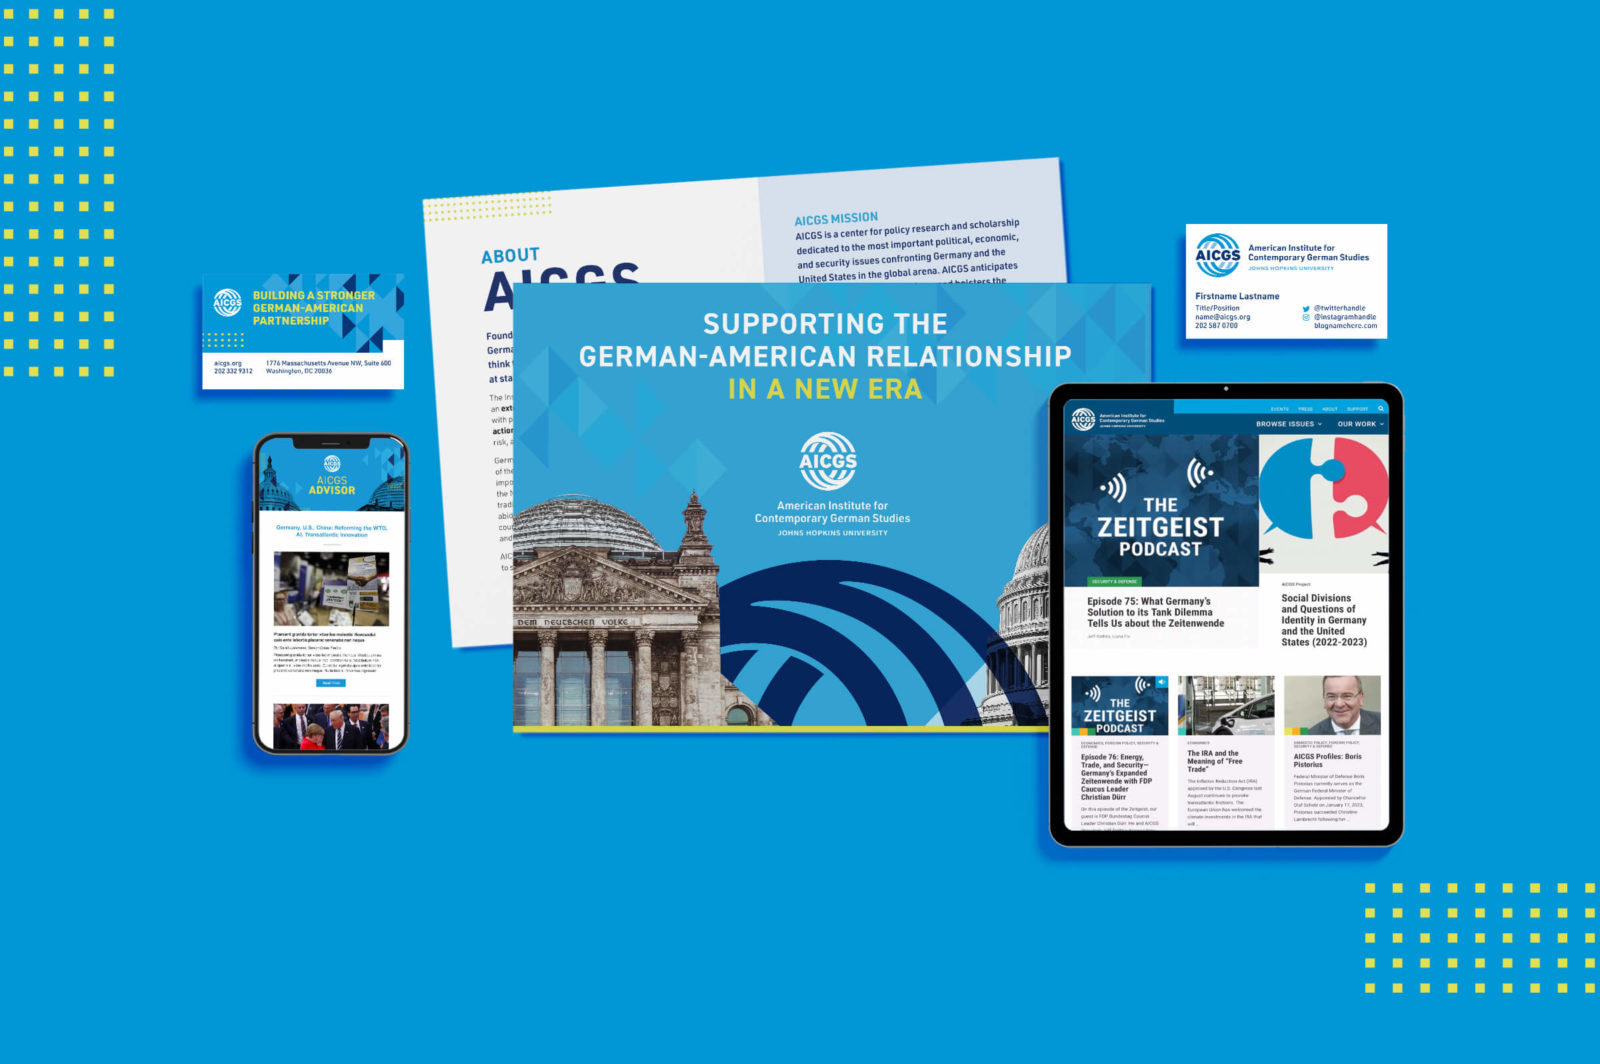 AICGS web and print material designed by ob9